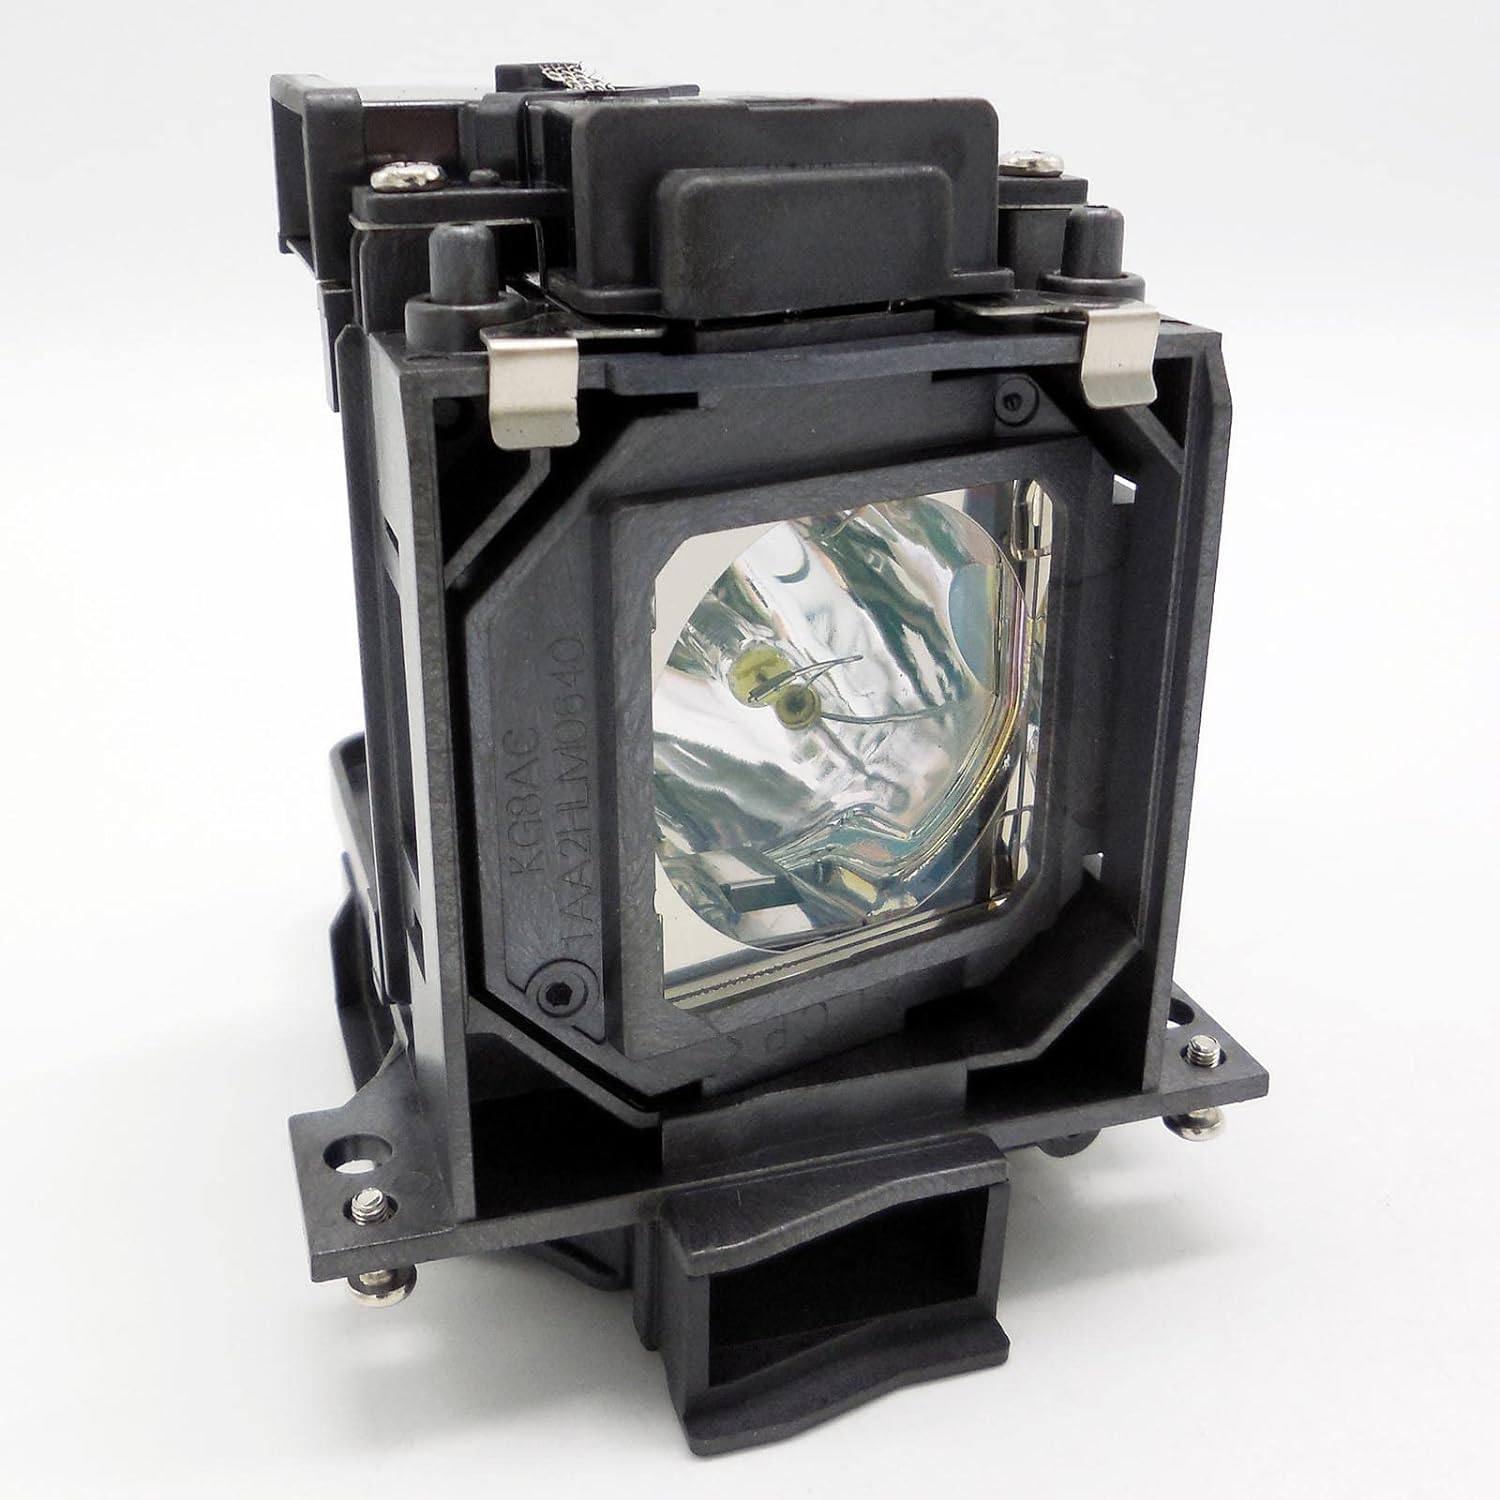 Replacement Projector lamp LV-LP36/5806B001AA For CANON LV-8235/LV-8235UST